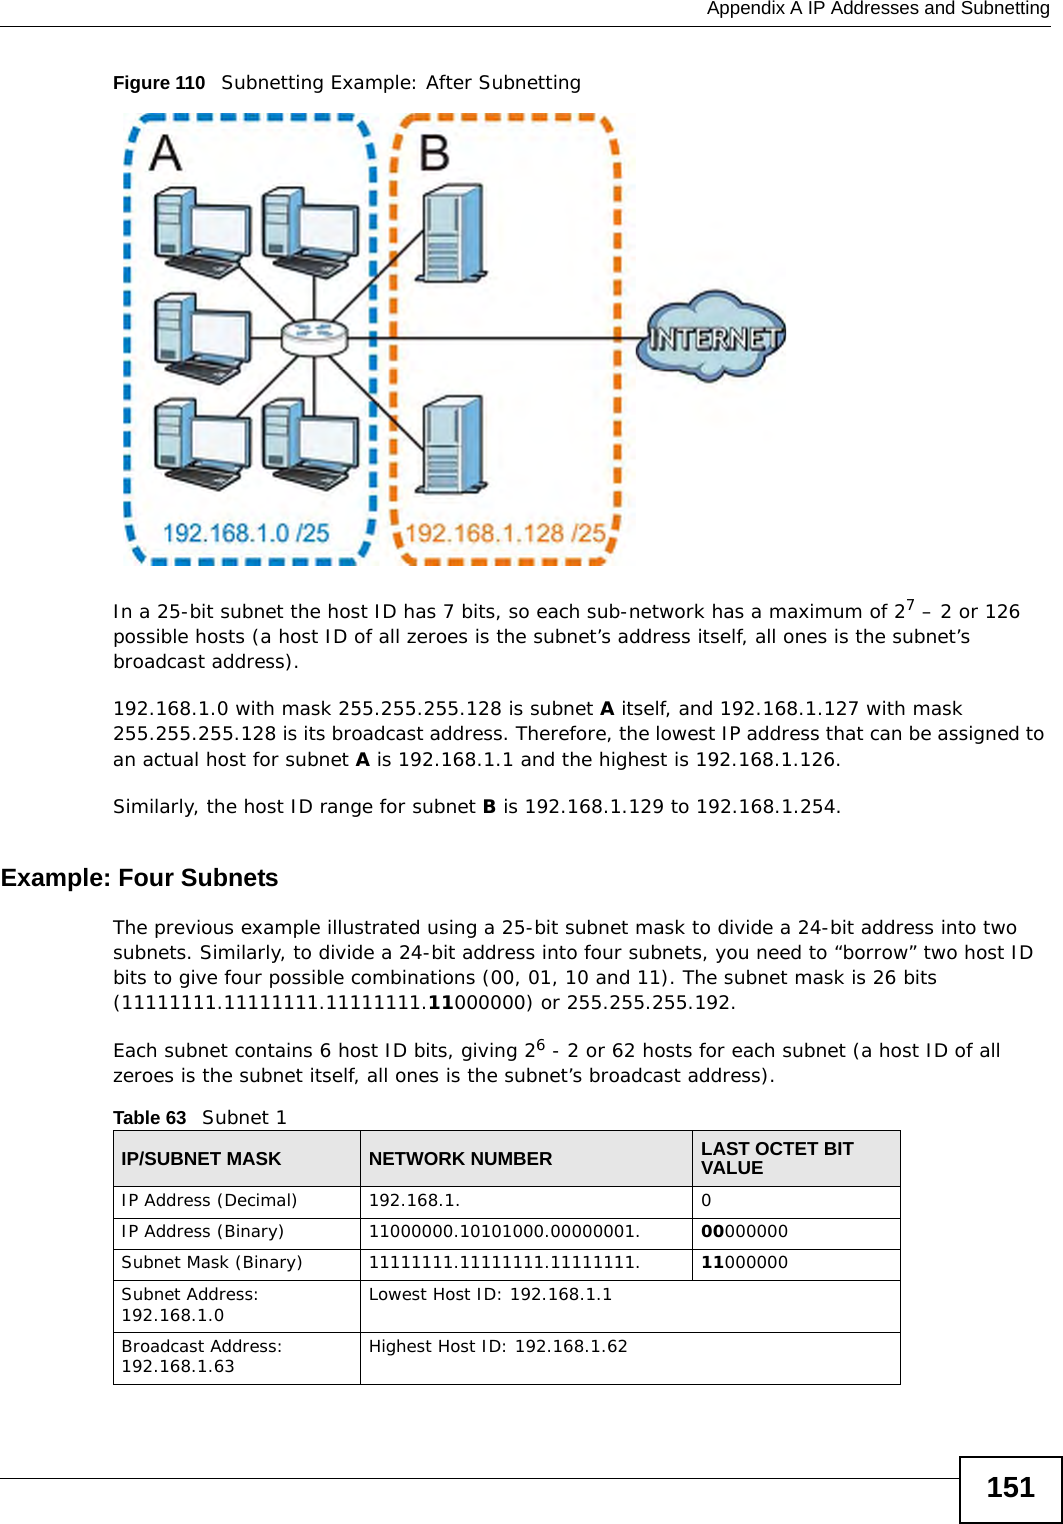  Appendix A IP Addresses and Subnetting151Figure 110   Subnetting Example: After SubnettingIn a 25-bit subnet the host ID has 7 bits, so each sub-network has a maximum of 27 – 2 or 126 possible hosts (a host ID of all zeroes is the subnet’s address itself, all ones is the subnet’s broadcast address).192.168.1.0 with mask 255.255.255.128 is subnet A itself, and 192.168.1.127 with mask 255.255.255.128 is its broadcast address. Therefore, the lowest IP address that can be assigned to an actual host for subnet A is 192.168.1.1 and the highest is 192.168.1.126. Similarly, the host ID range for subnet B is 192.168.1.129 to 192.168.1.254.Example: Four Subnets The previous example illustrated using a 25-bit subnet mask to divide a 24-bit address into two subnets. Similarly, to divide a 24-bit address into four subnets, you need to “borrow” two host ID bits to give four possible combinations (00, 01, 10 and 11). The subnet mask is 26 bits (11111111.11111111.11111111.11000000) or 255.255.255.192. Each subnet contains 6 host ID bits, giving 26 - 2 or 62 hosts for each subnet (a host ID of all zeroes is the subnet itself, all ones is the subnet’s broadcast address). Table 63   Subnet 1IP/SUBNET MASK NETWORK NUMBER LAST OCTET BIT VALUEIP Address (Decimal) 192.168.1. 0IP Address (Binary) 11000000.10101000.00000001. 00000000Subnet Mask (Binary) 11111111.11111111.11111111. 11000000Subnet Address: 192.168.1.0 Lowest Host ID: 192.168.1.1Broadcast Address: 192.168.1.63 Highest Host ID: 192.168.1.62